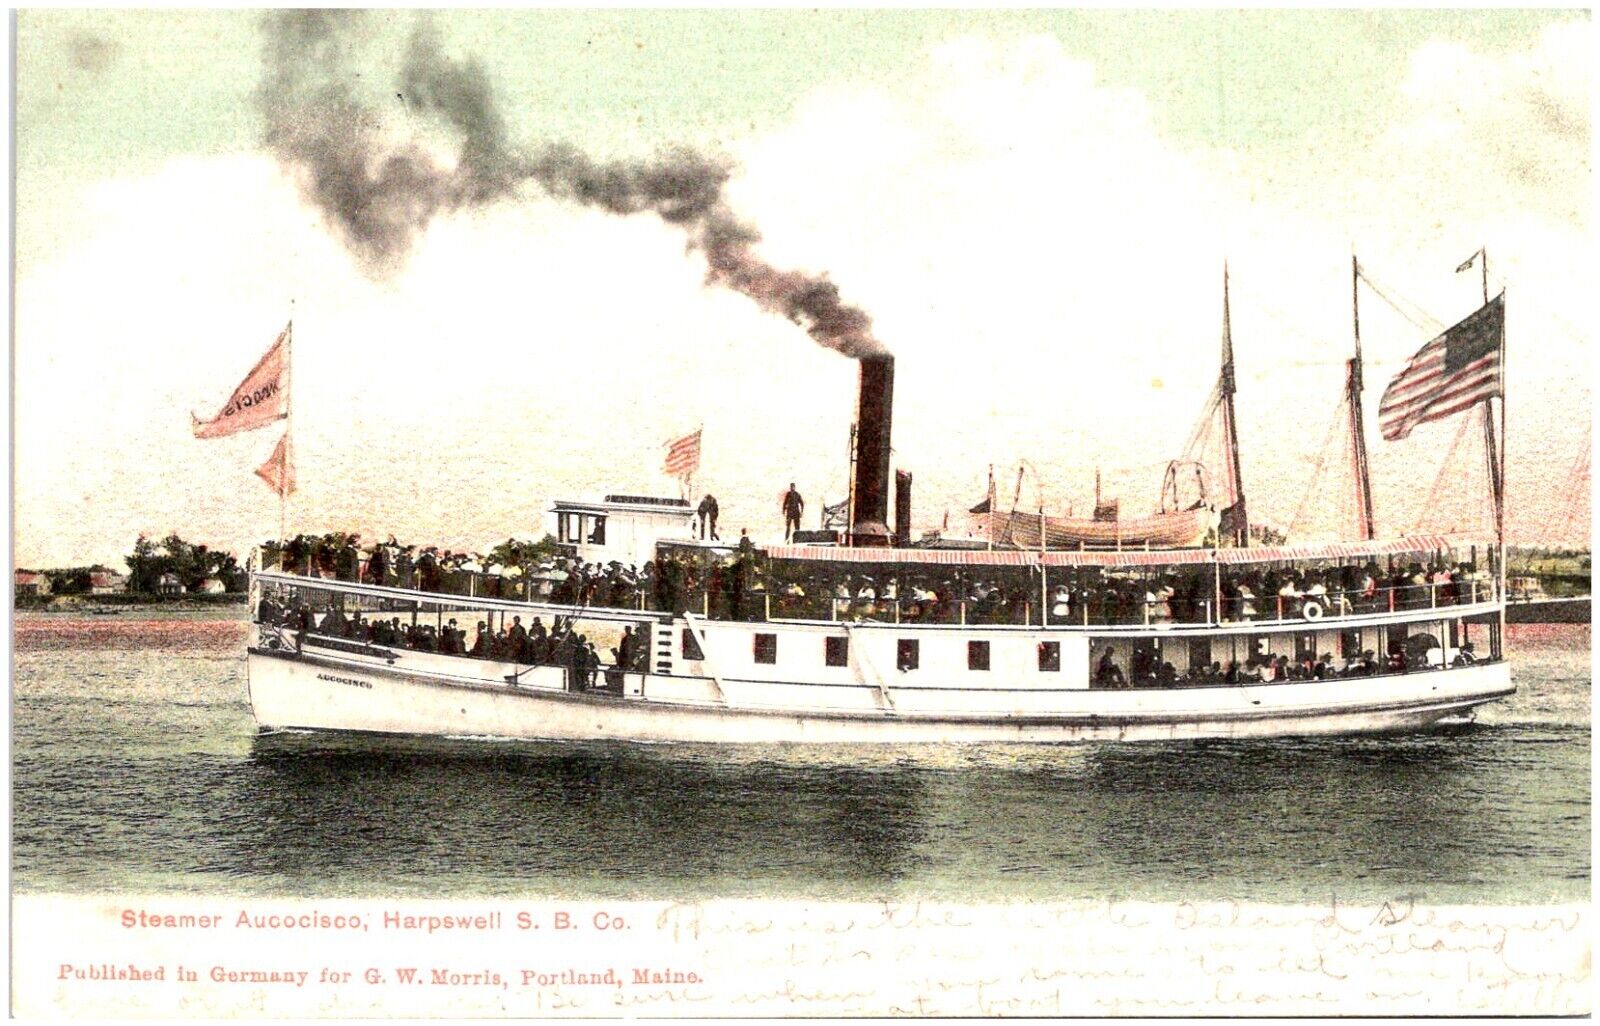 Aucocisco, Harpswell S.b. Co., Portland, Maine, Hand-colored